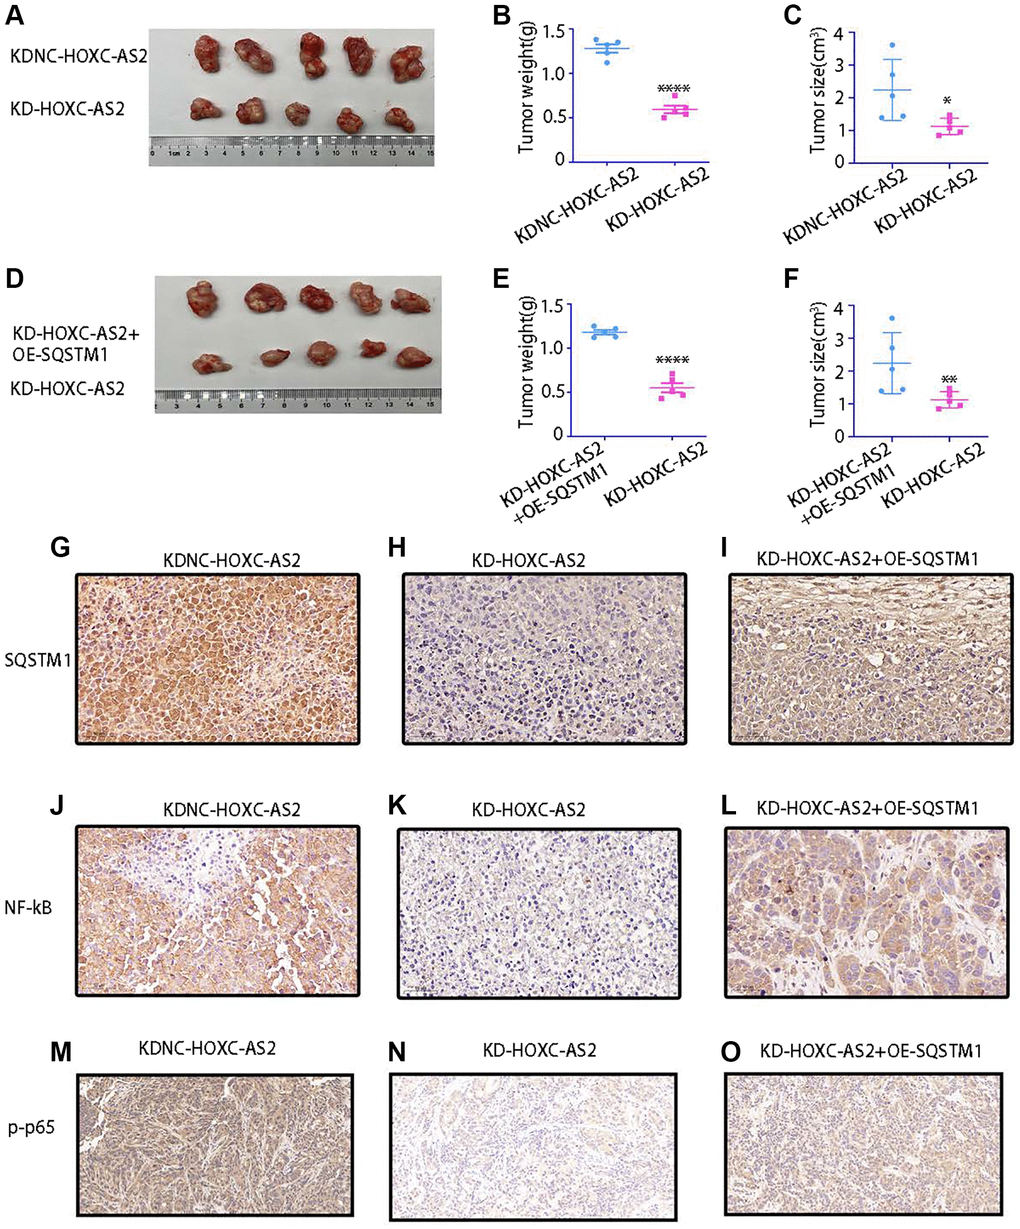 The results of animal experiments confirmed that HOXC-AS2 can promote hypopharyngeal cancer progression. (A–C) Morphological characteristics of subcutaneous xenografts (A), tumor weight (B), and tumor size (C) on day 35 in mice injected with LV-KDNC-HOXC-AS2-D-562 cells and LV-KD-HOXC-AS2-D-562 cells (five mice per group). (D–F) Morphological characteristics of subcutaneous xenografts (D), tumor weight (E), and tumor size (F) on day 35 in mice injected with LV-KD-HOXC-AS2 +OE-P62-D-562 cells and LV-KD-HOXC-AS2-D-562 cells (five mice per group). (G–I) IHC analysis of P62 protein expression in tumors from the LV-KDNC-HOXC-AS2, LV-KD-HOXC-AS, and LV-KD-HOXC-AS2 +OE-P62 groups. (J–L) IHC analysis of NF-kB protein expression in tumors from the LV-KDNC-HOXC-AS2, LV-KD-HOXC-AS, and LV-KD-HOXC-AS2 +OE-P62 groups. (M–O) IHC analysis of p-p65 protein expression in tumors from the LV-KDNC-HOXC-AS2, LV-KD-HOXC-AS, and LV-KD-HOXC-AS2 +OE-P62 groups.